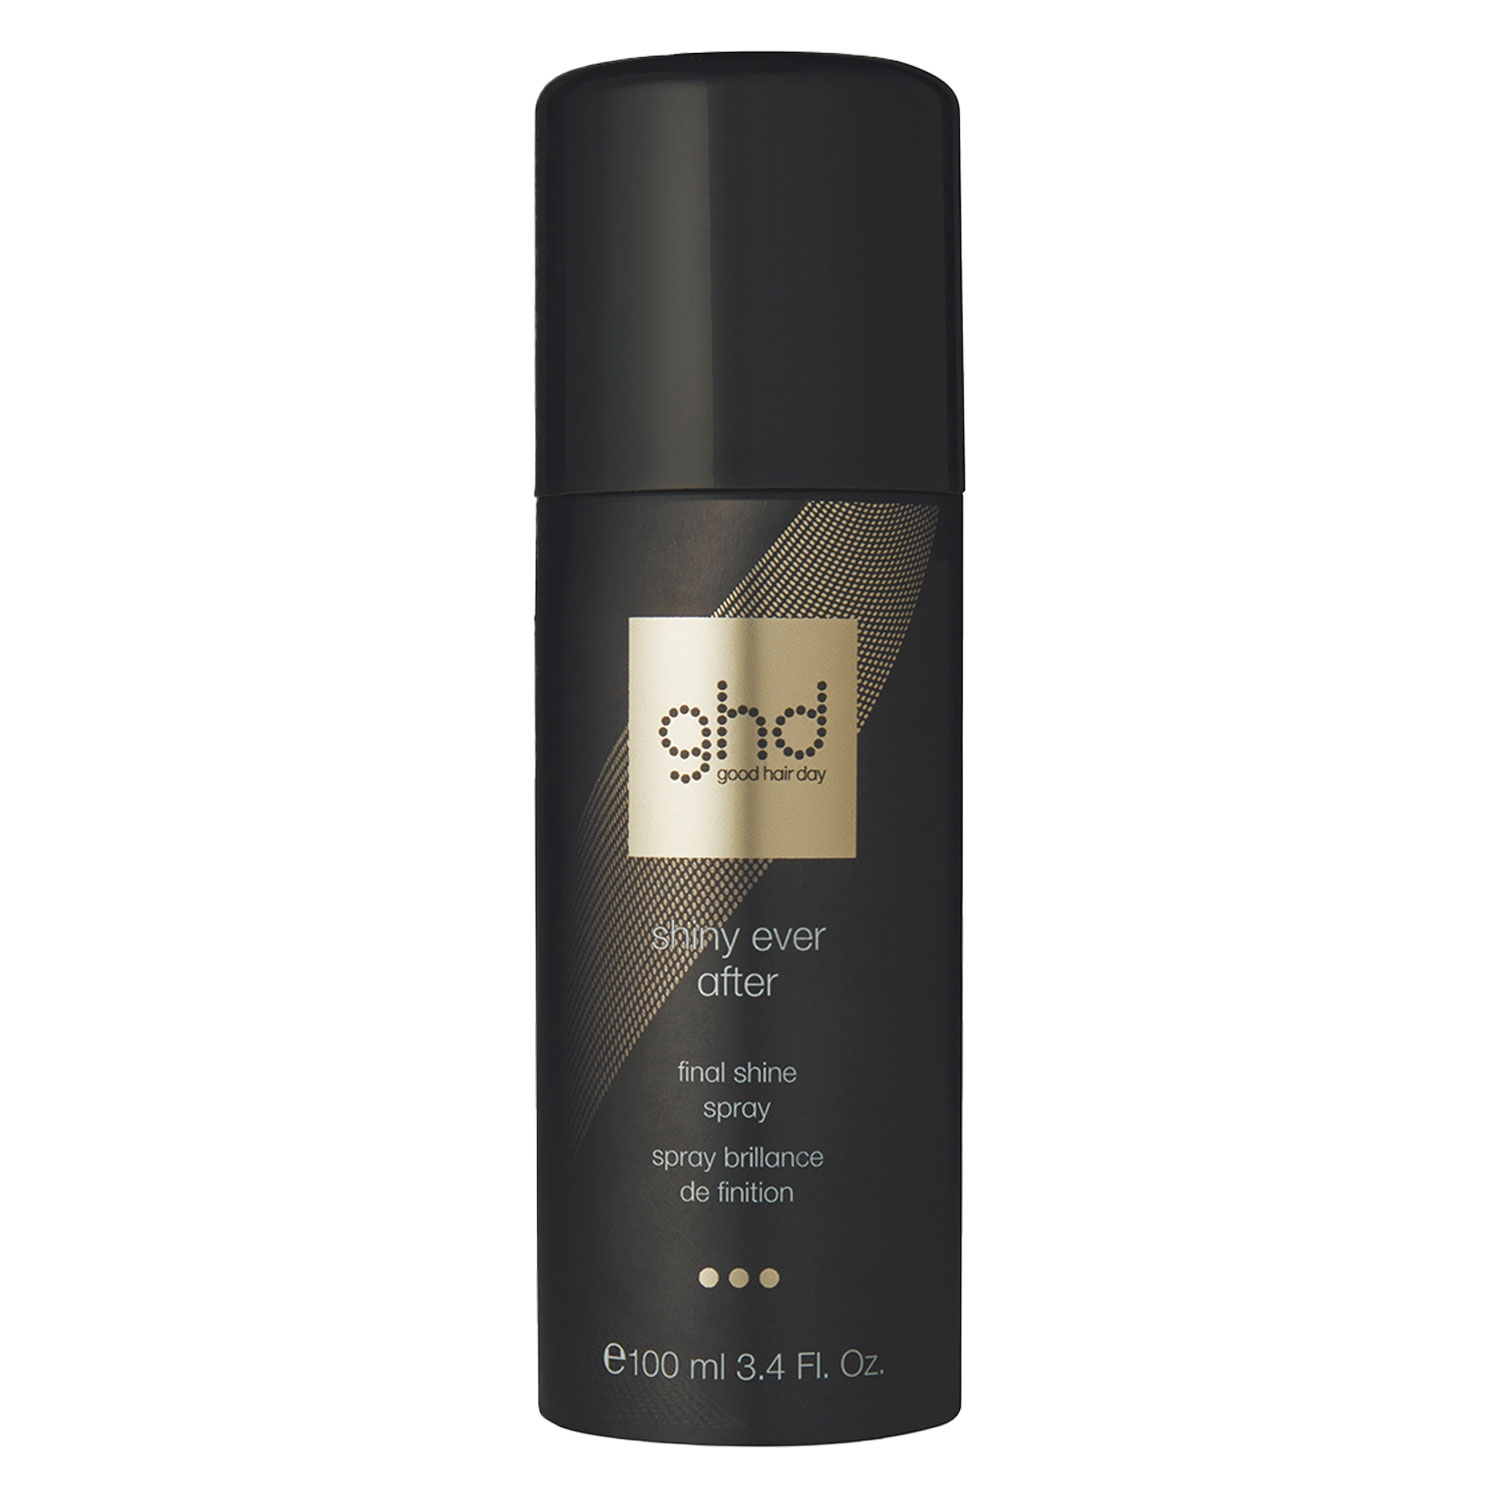 Product image from ghd Heat Protection Styling System - Shiny Ever After Final Shine Spray